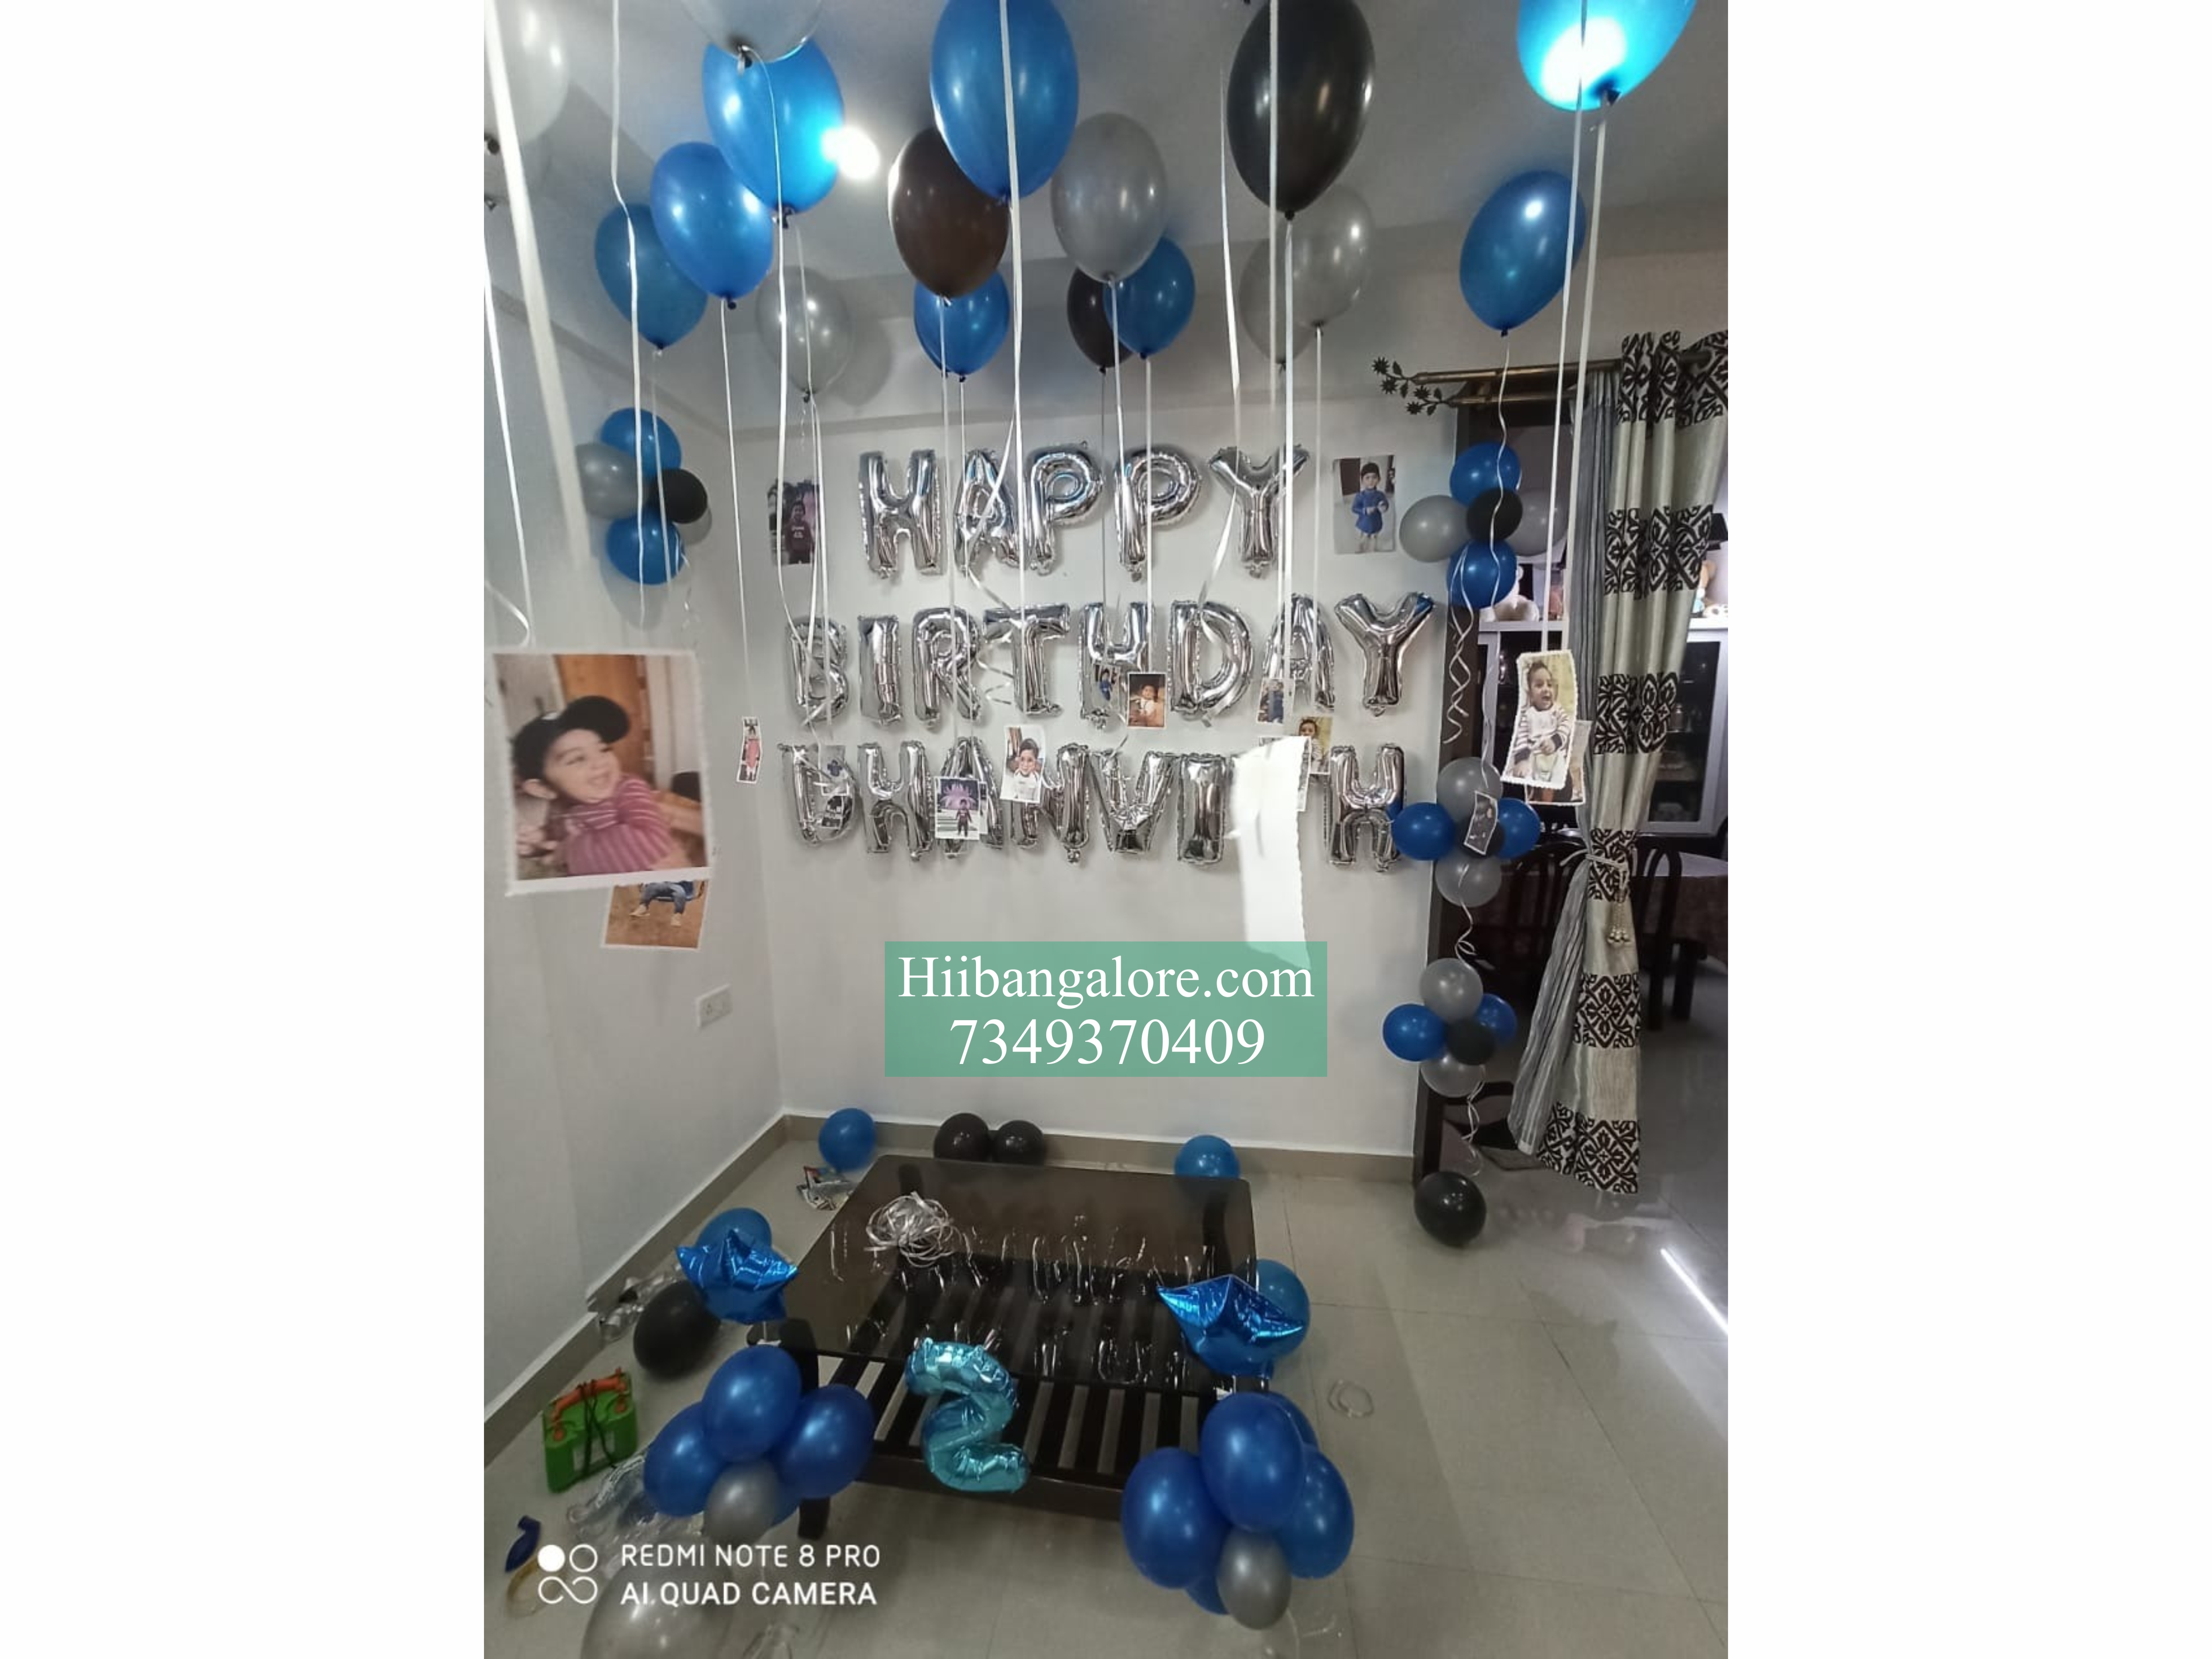 Simple Balloon Decoration For Kids Birthday Party At Home Best Anisers Decorators Caterers In Bangalore - Simple Balloon Decoration Ideas For Birthday Party At Home